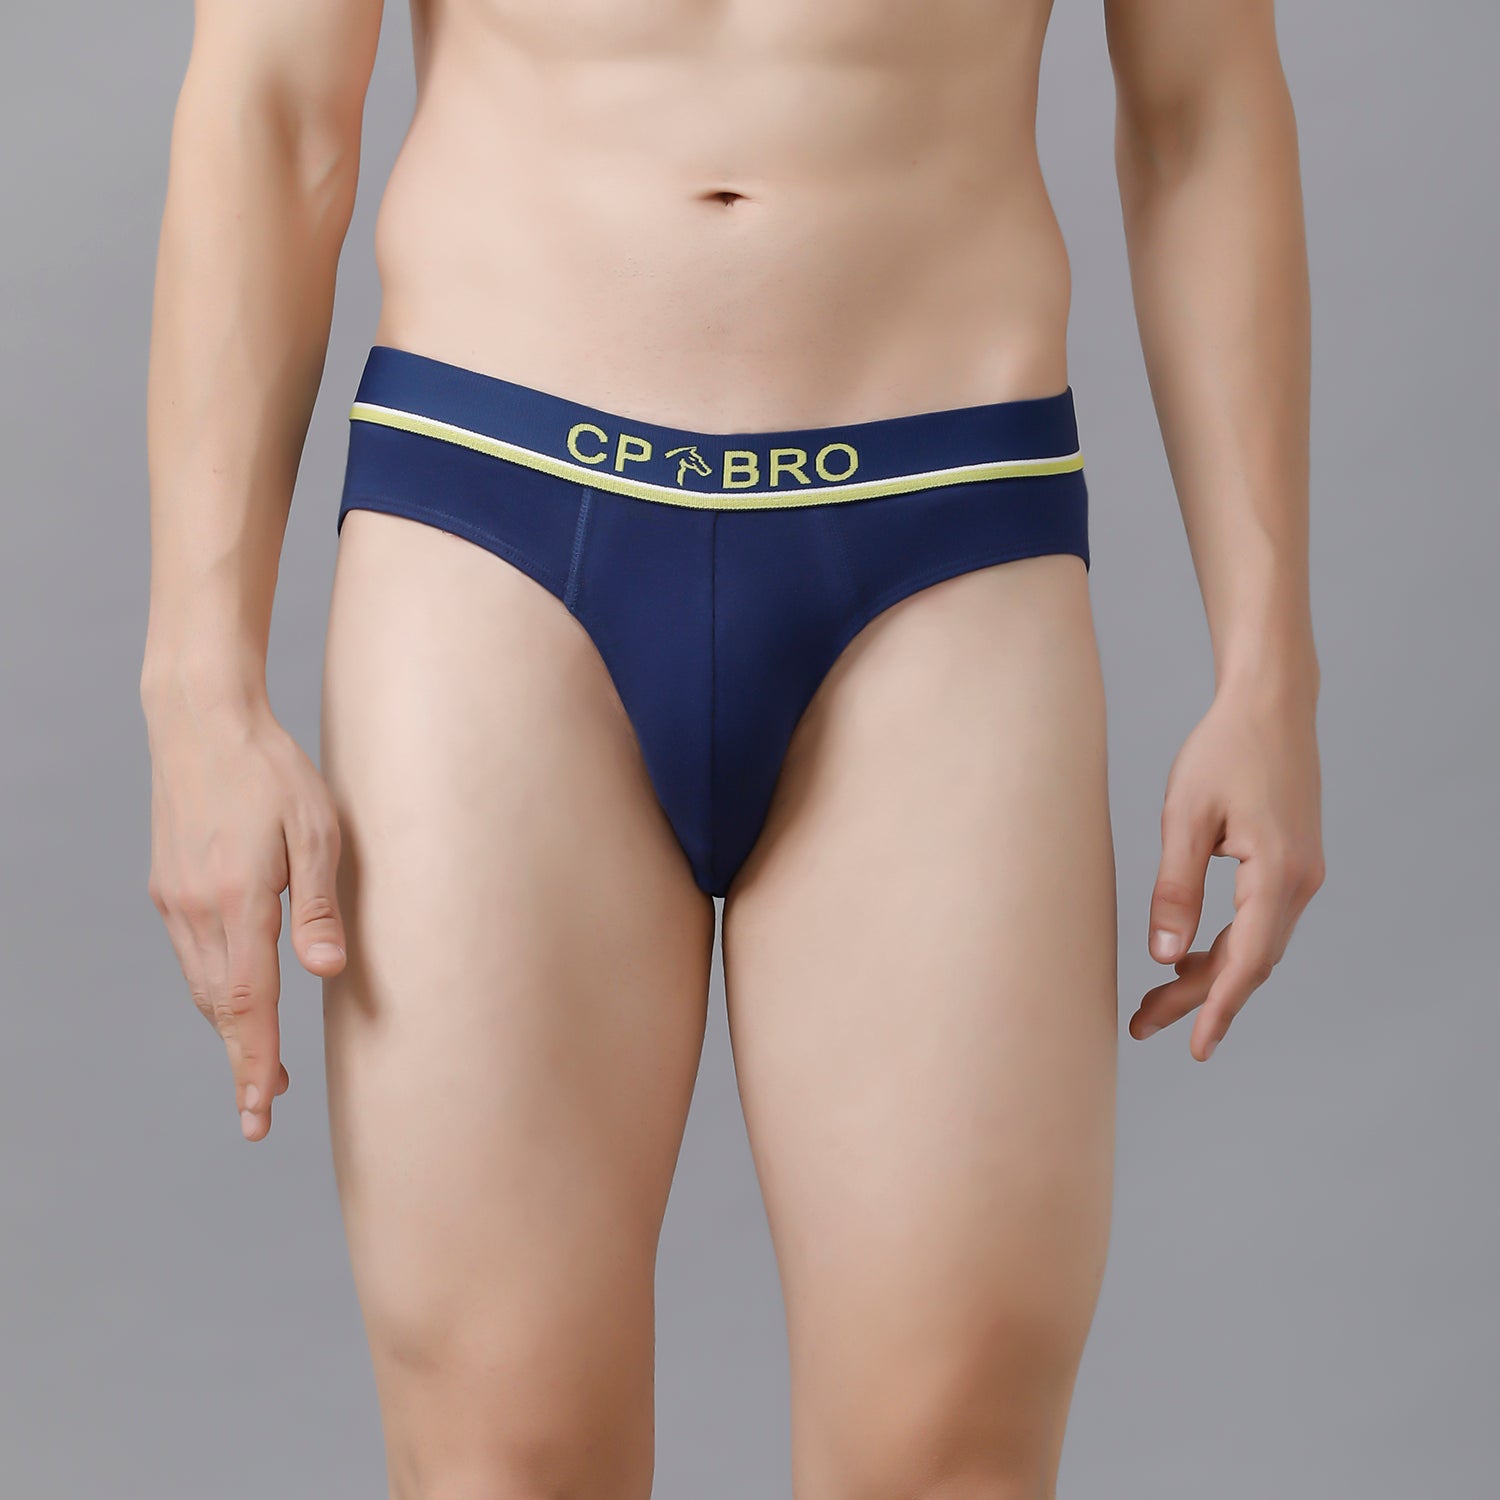 CP BRO Printed Briefs with Exposed Waistband Value - Multi Color (Pack of 3)